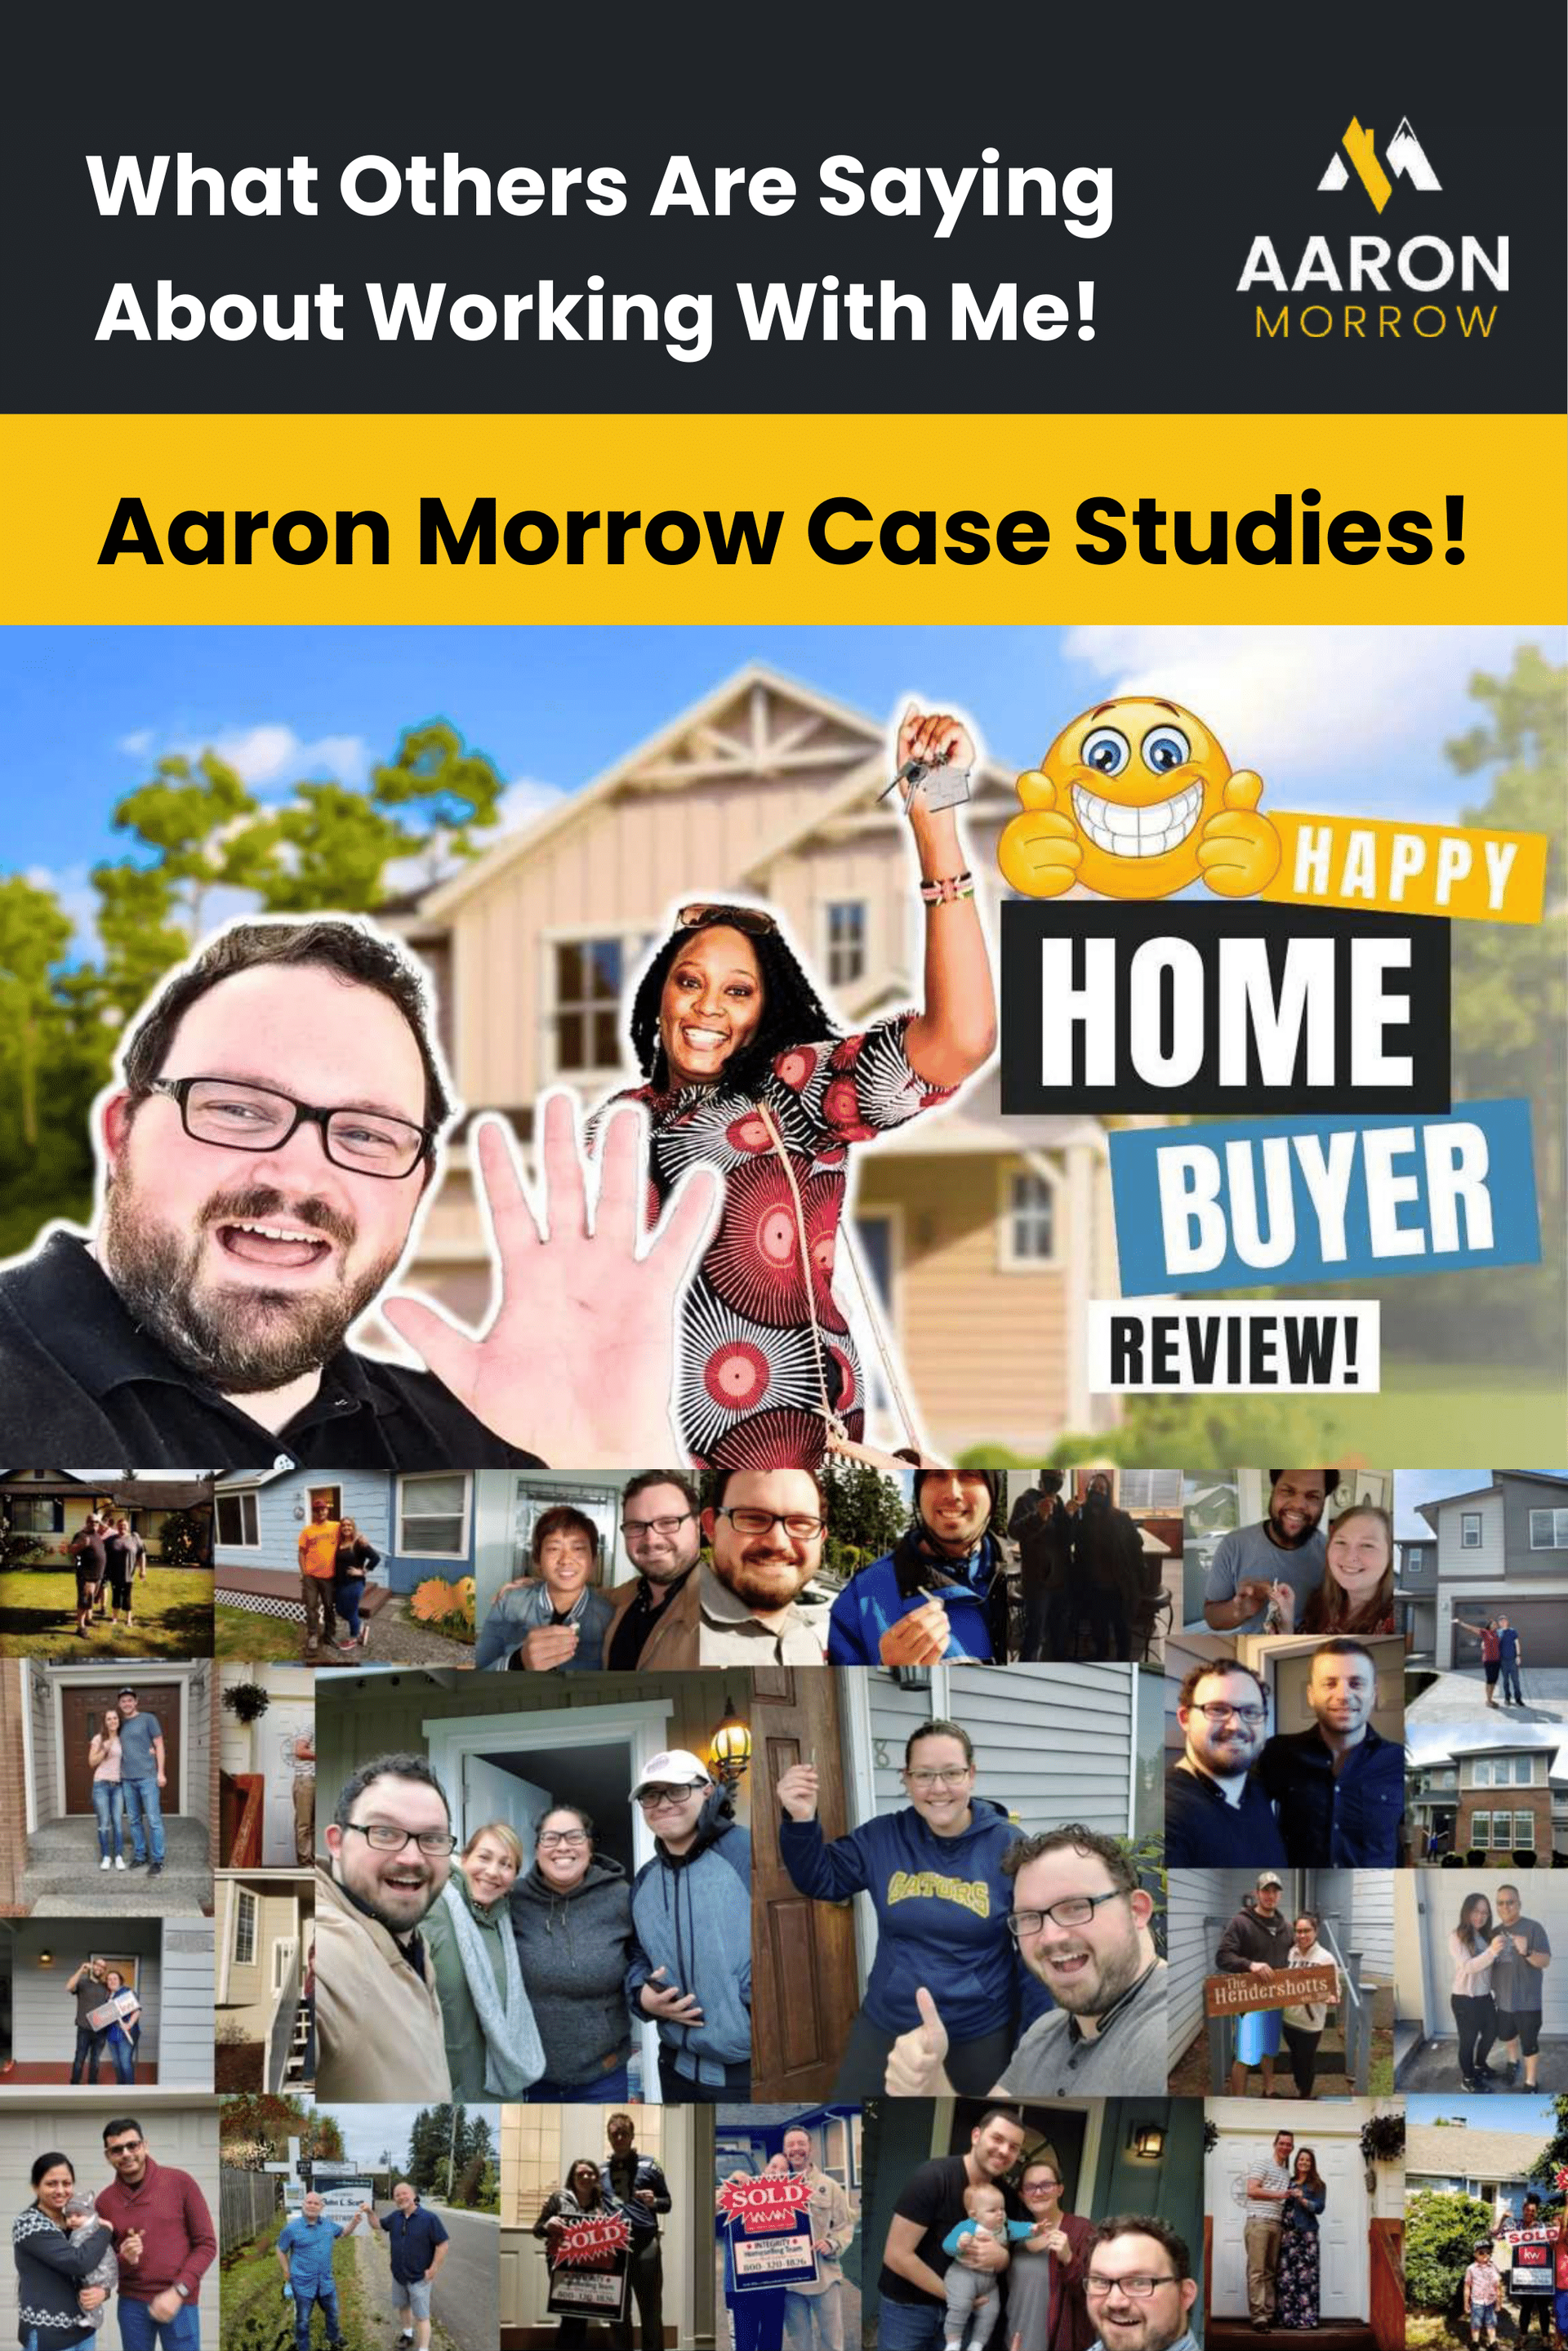 what others are saying about working with Aaron morrow case studies! happy home buyer review!